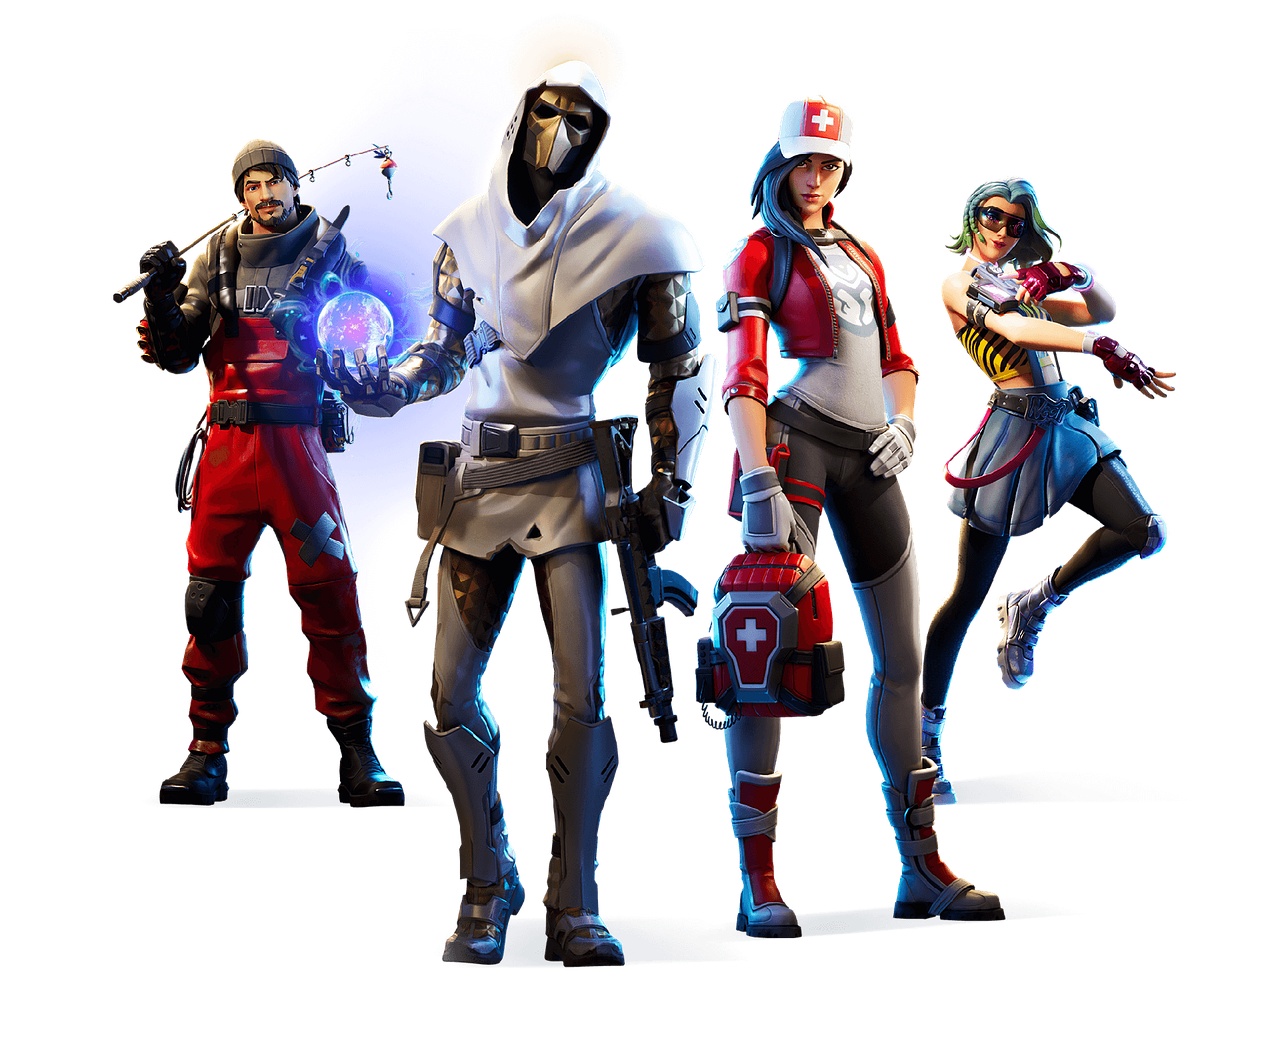 Fortnite returns to iOS, Android devices via Microsoft's Xbox Cloud Gaming  - BusinessWorld Online